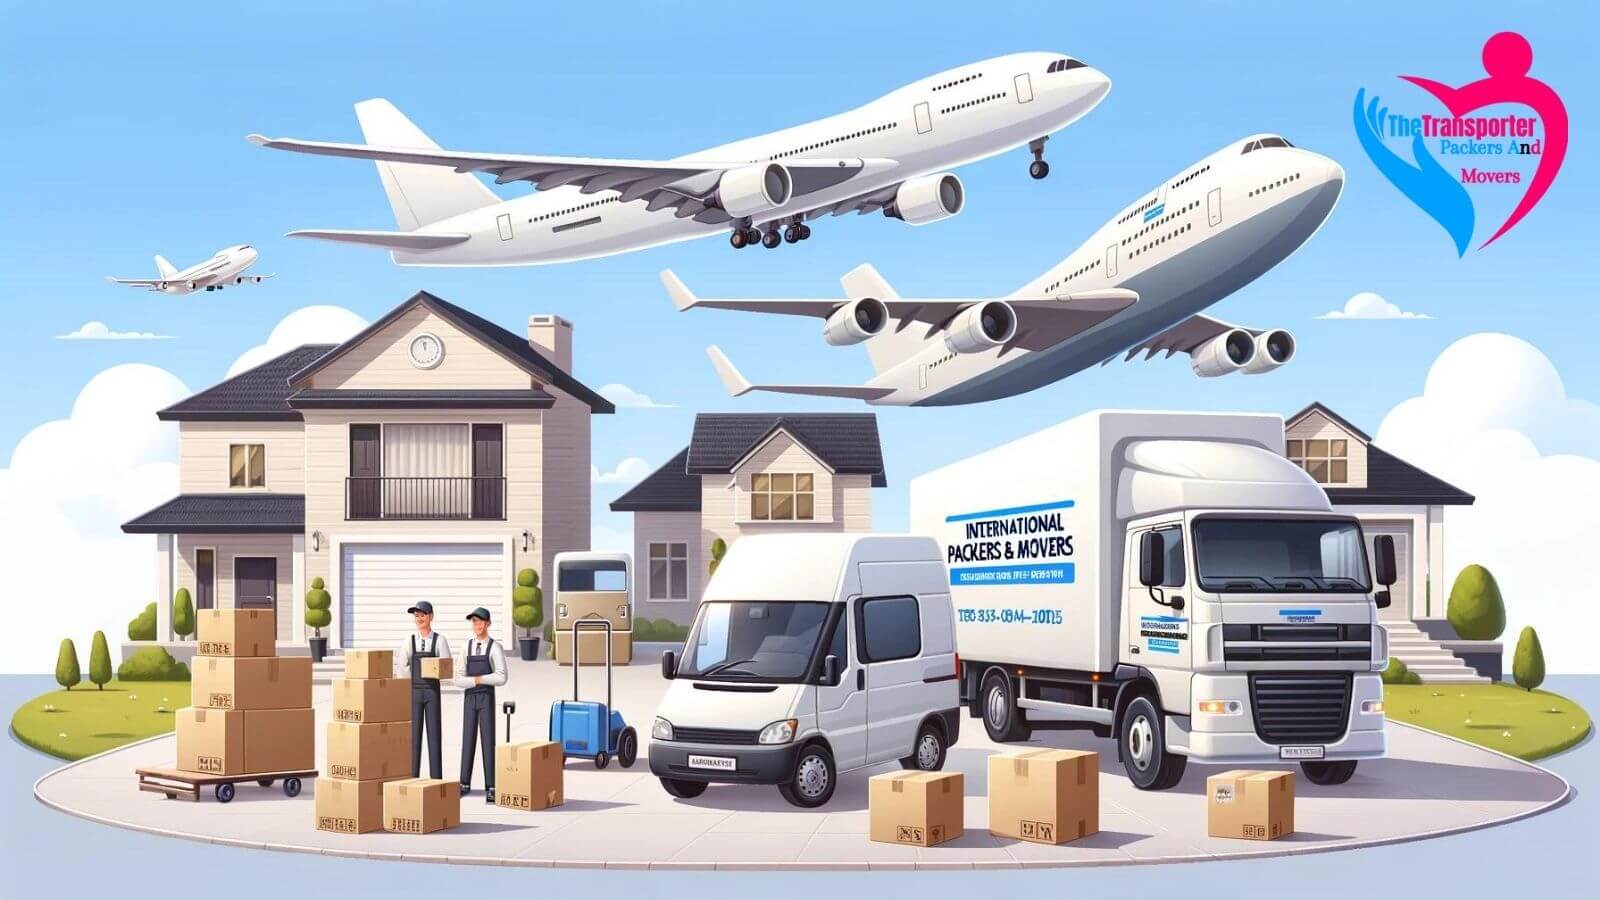 Nashik International Packers and Movers: Ensuring a Smooth Move